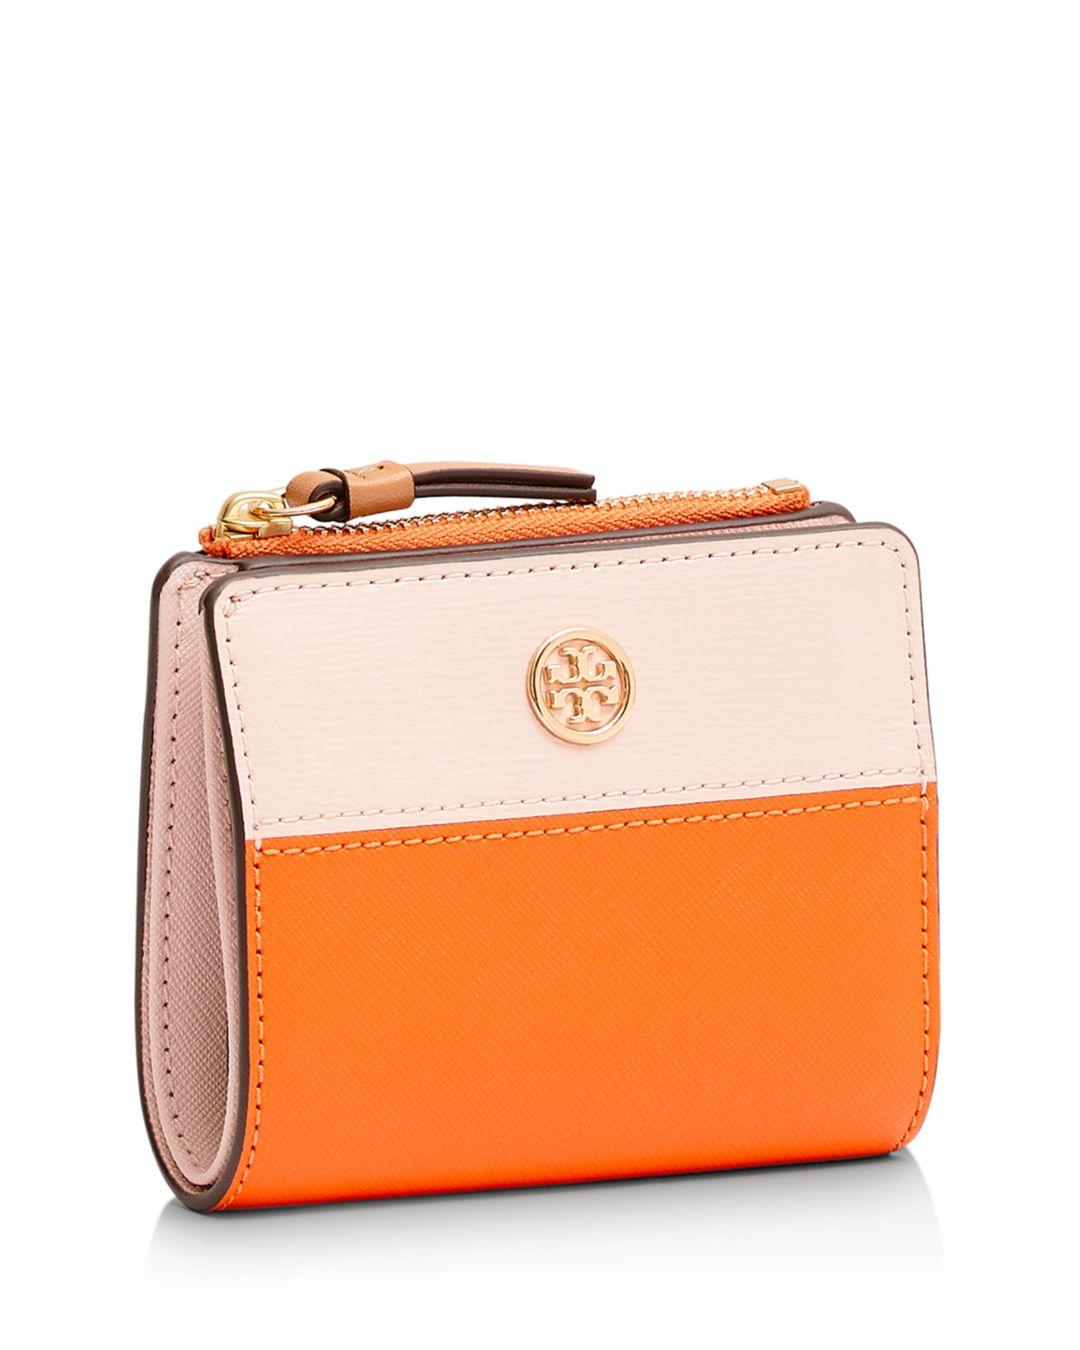 Tory Burch Leather Robinson Color-block Mini Wallet in Pink - Lyst